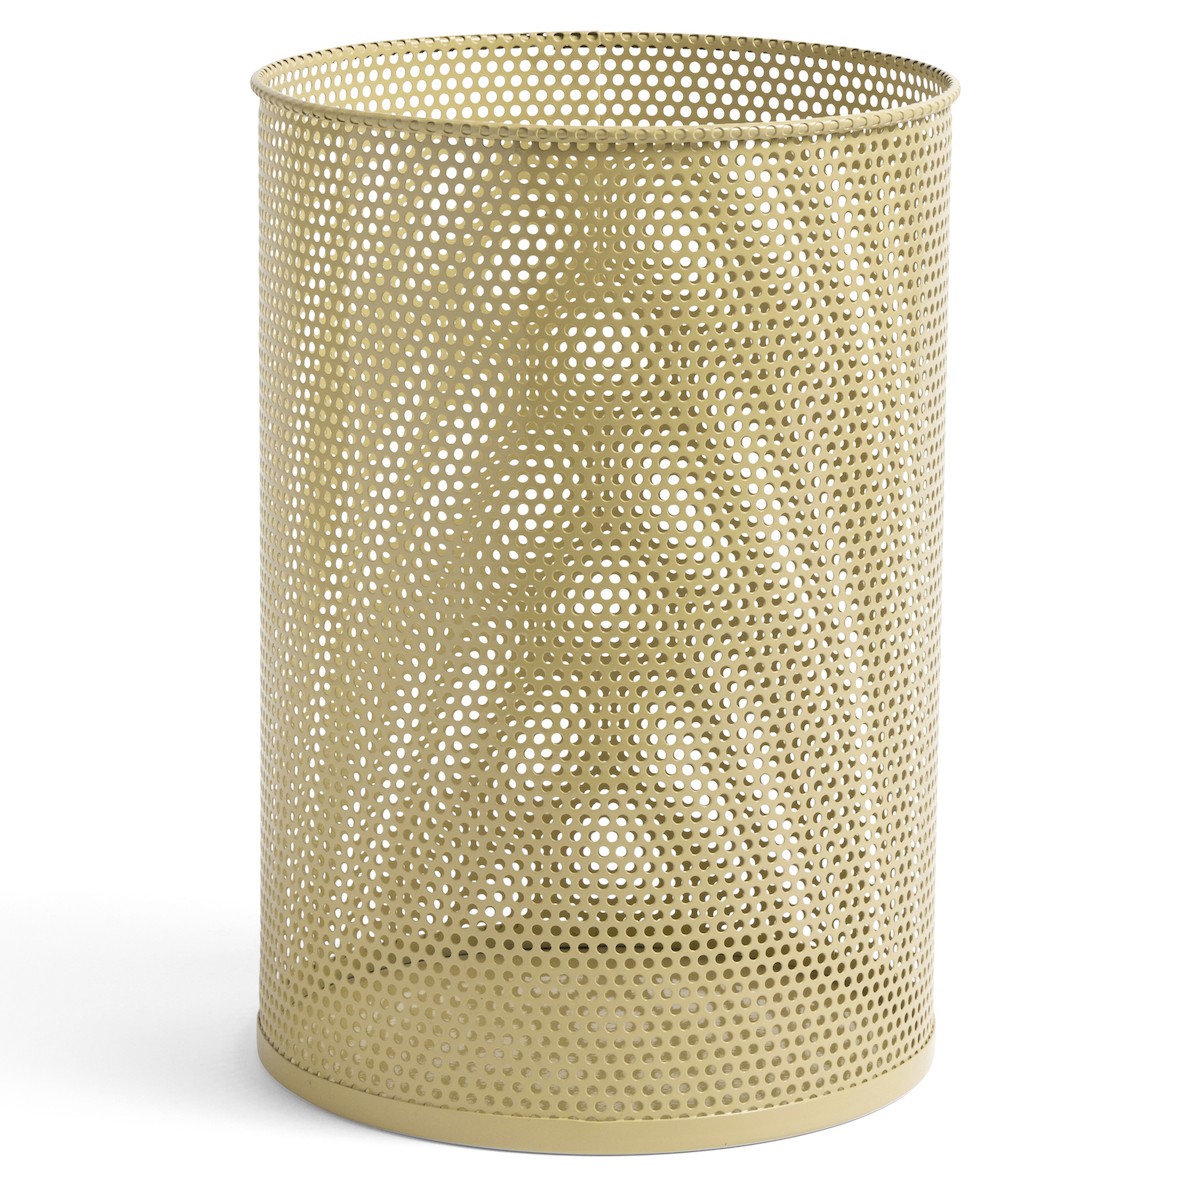 SOLD OUT - H44 x Ø30,5 cm - Dusty Yellow - Perforated Bin L